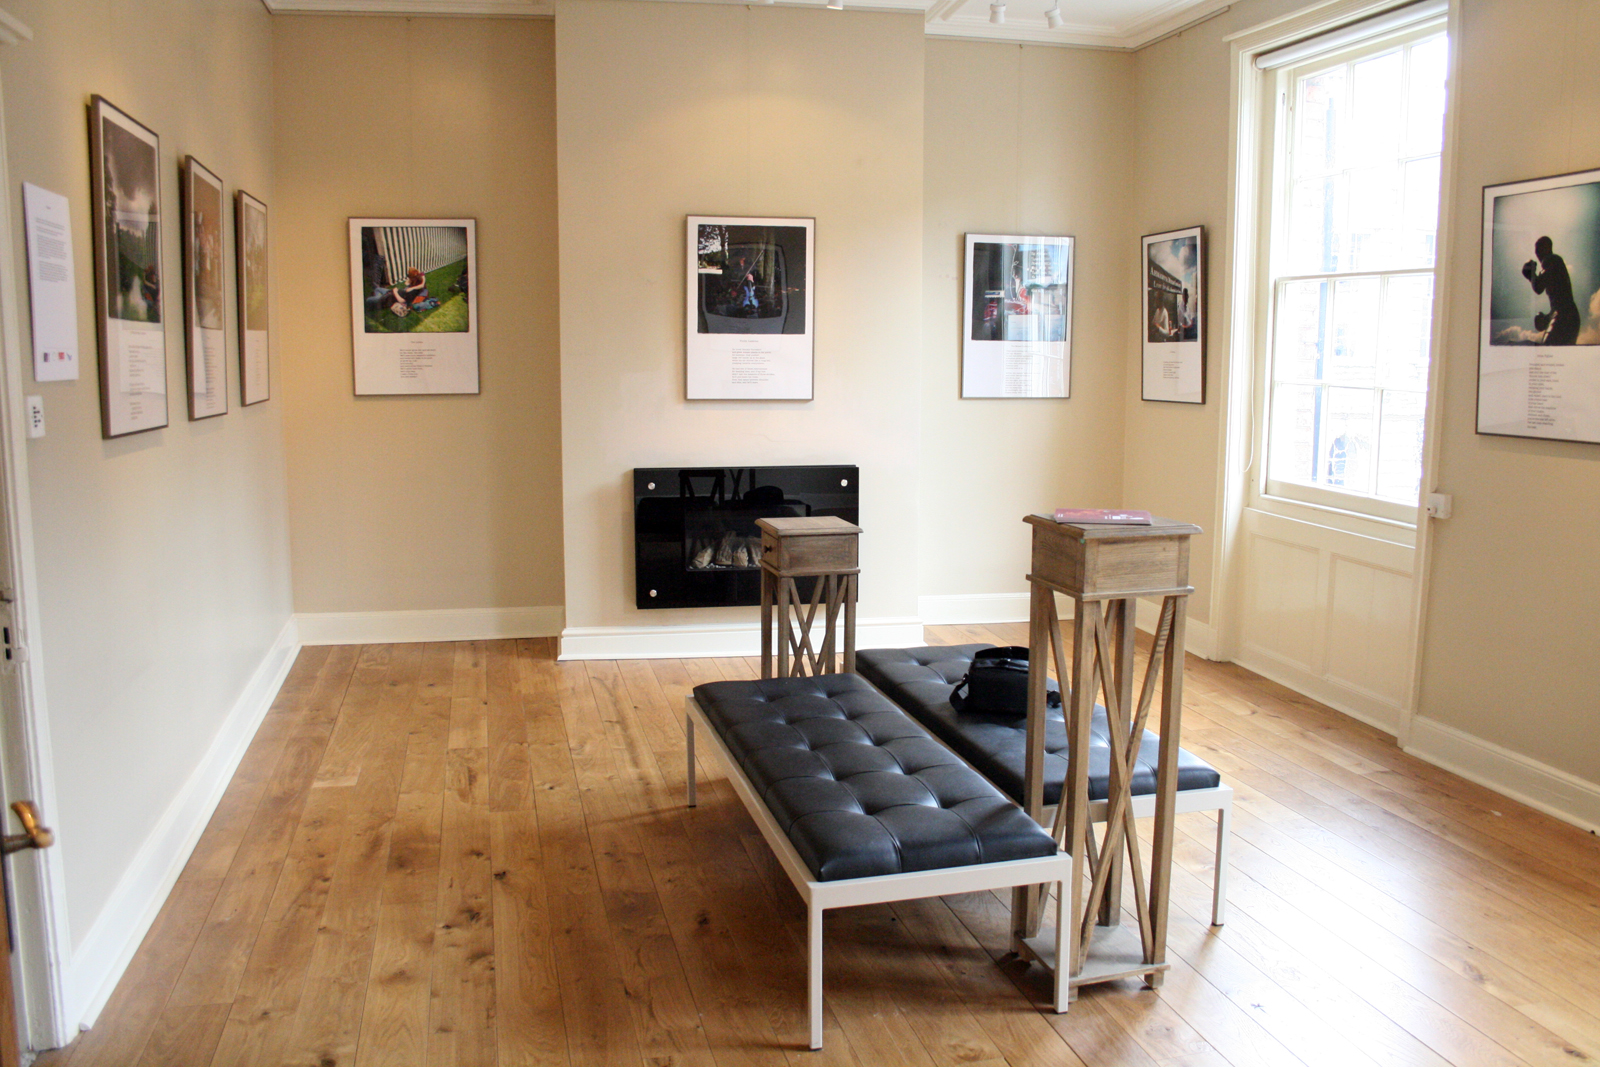 Installation view at Art and Wine gallery, Warwick 2009.